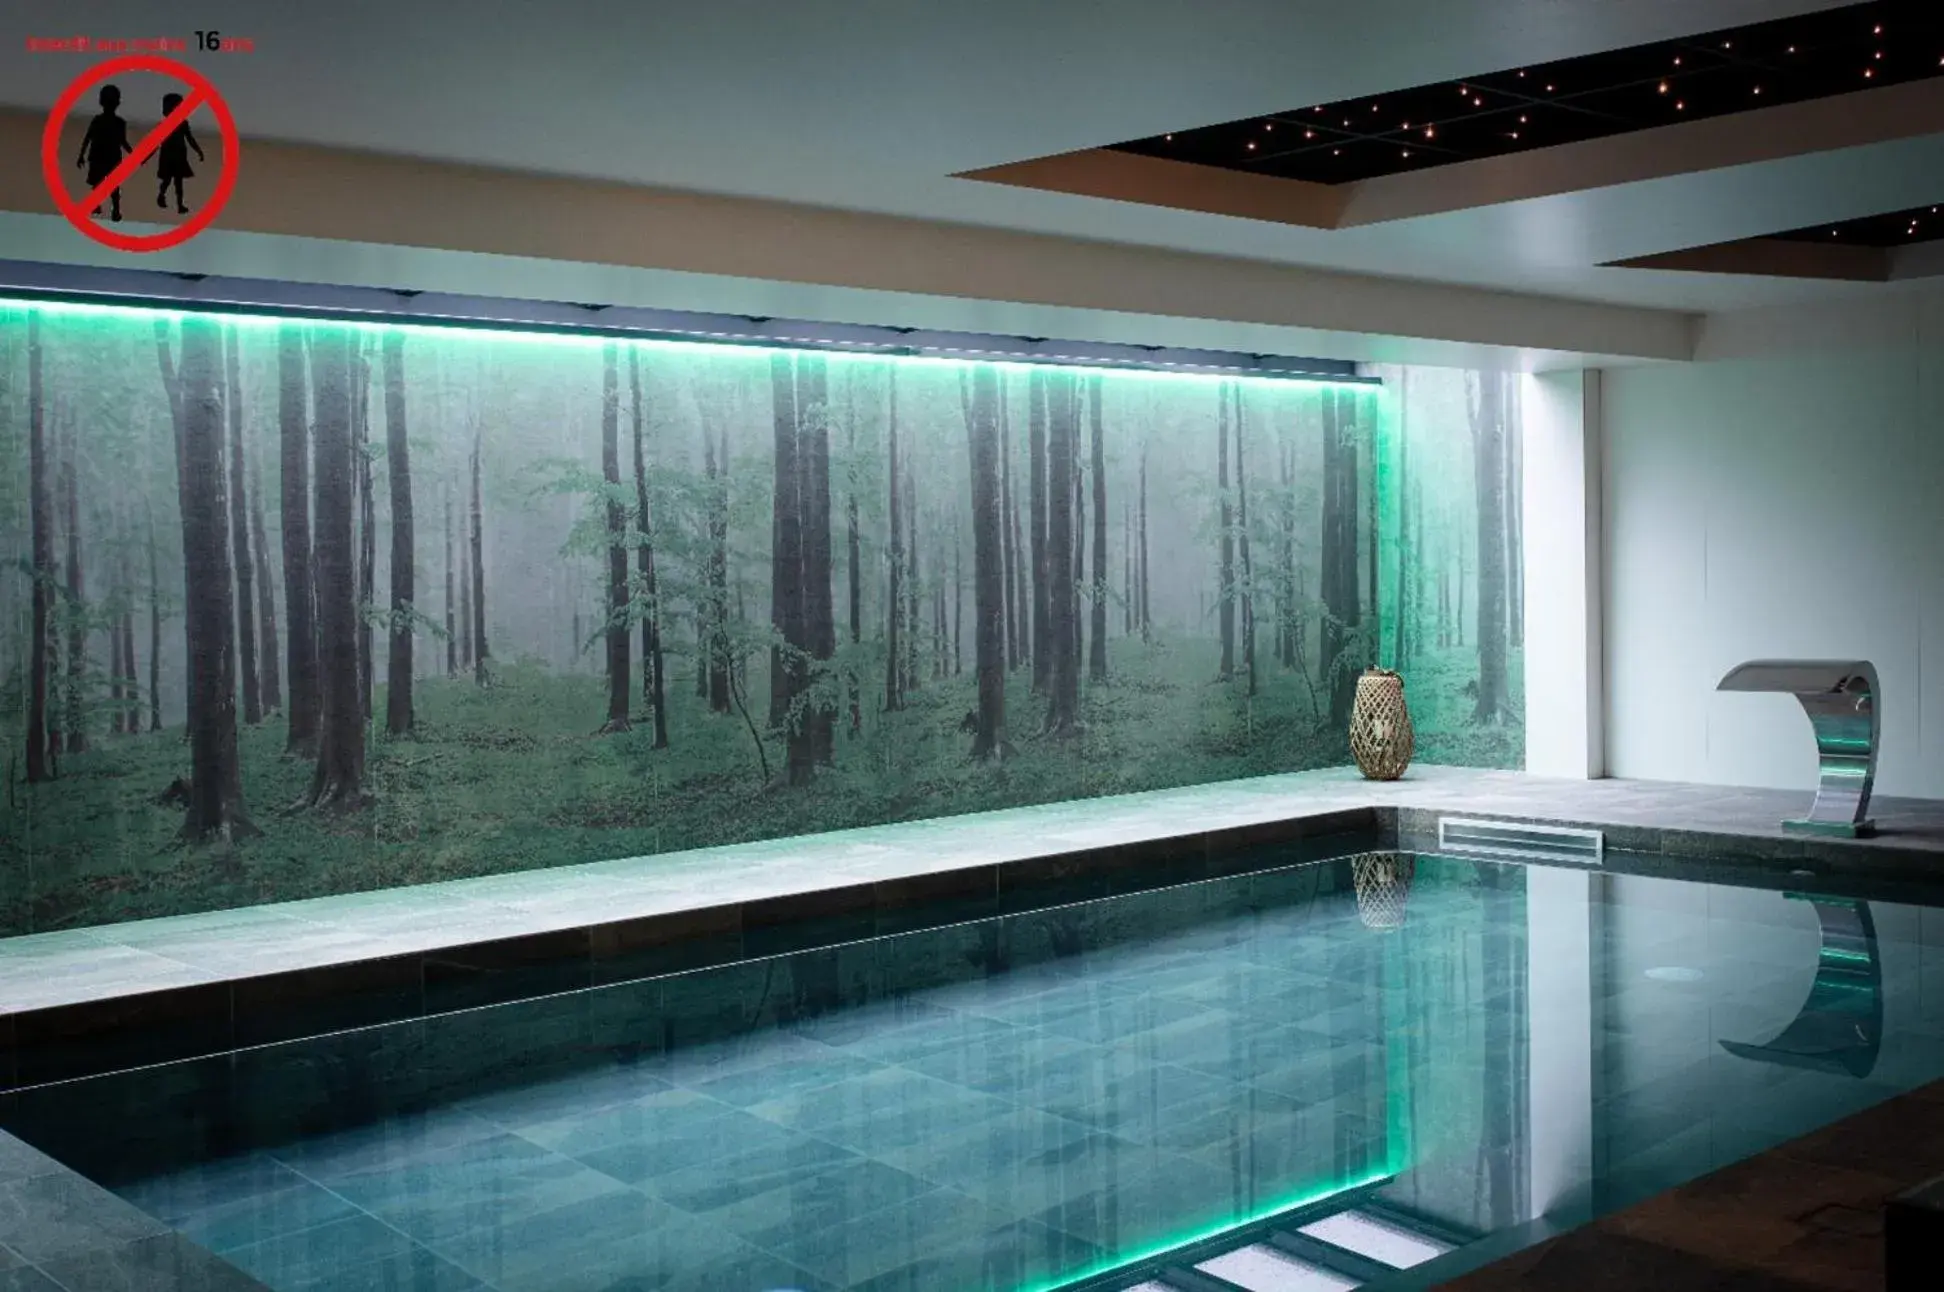 Spa and wellness centre/facilities, Swimming Pool in Europe Haguenau – Hotel & Spa